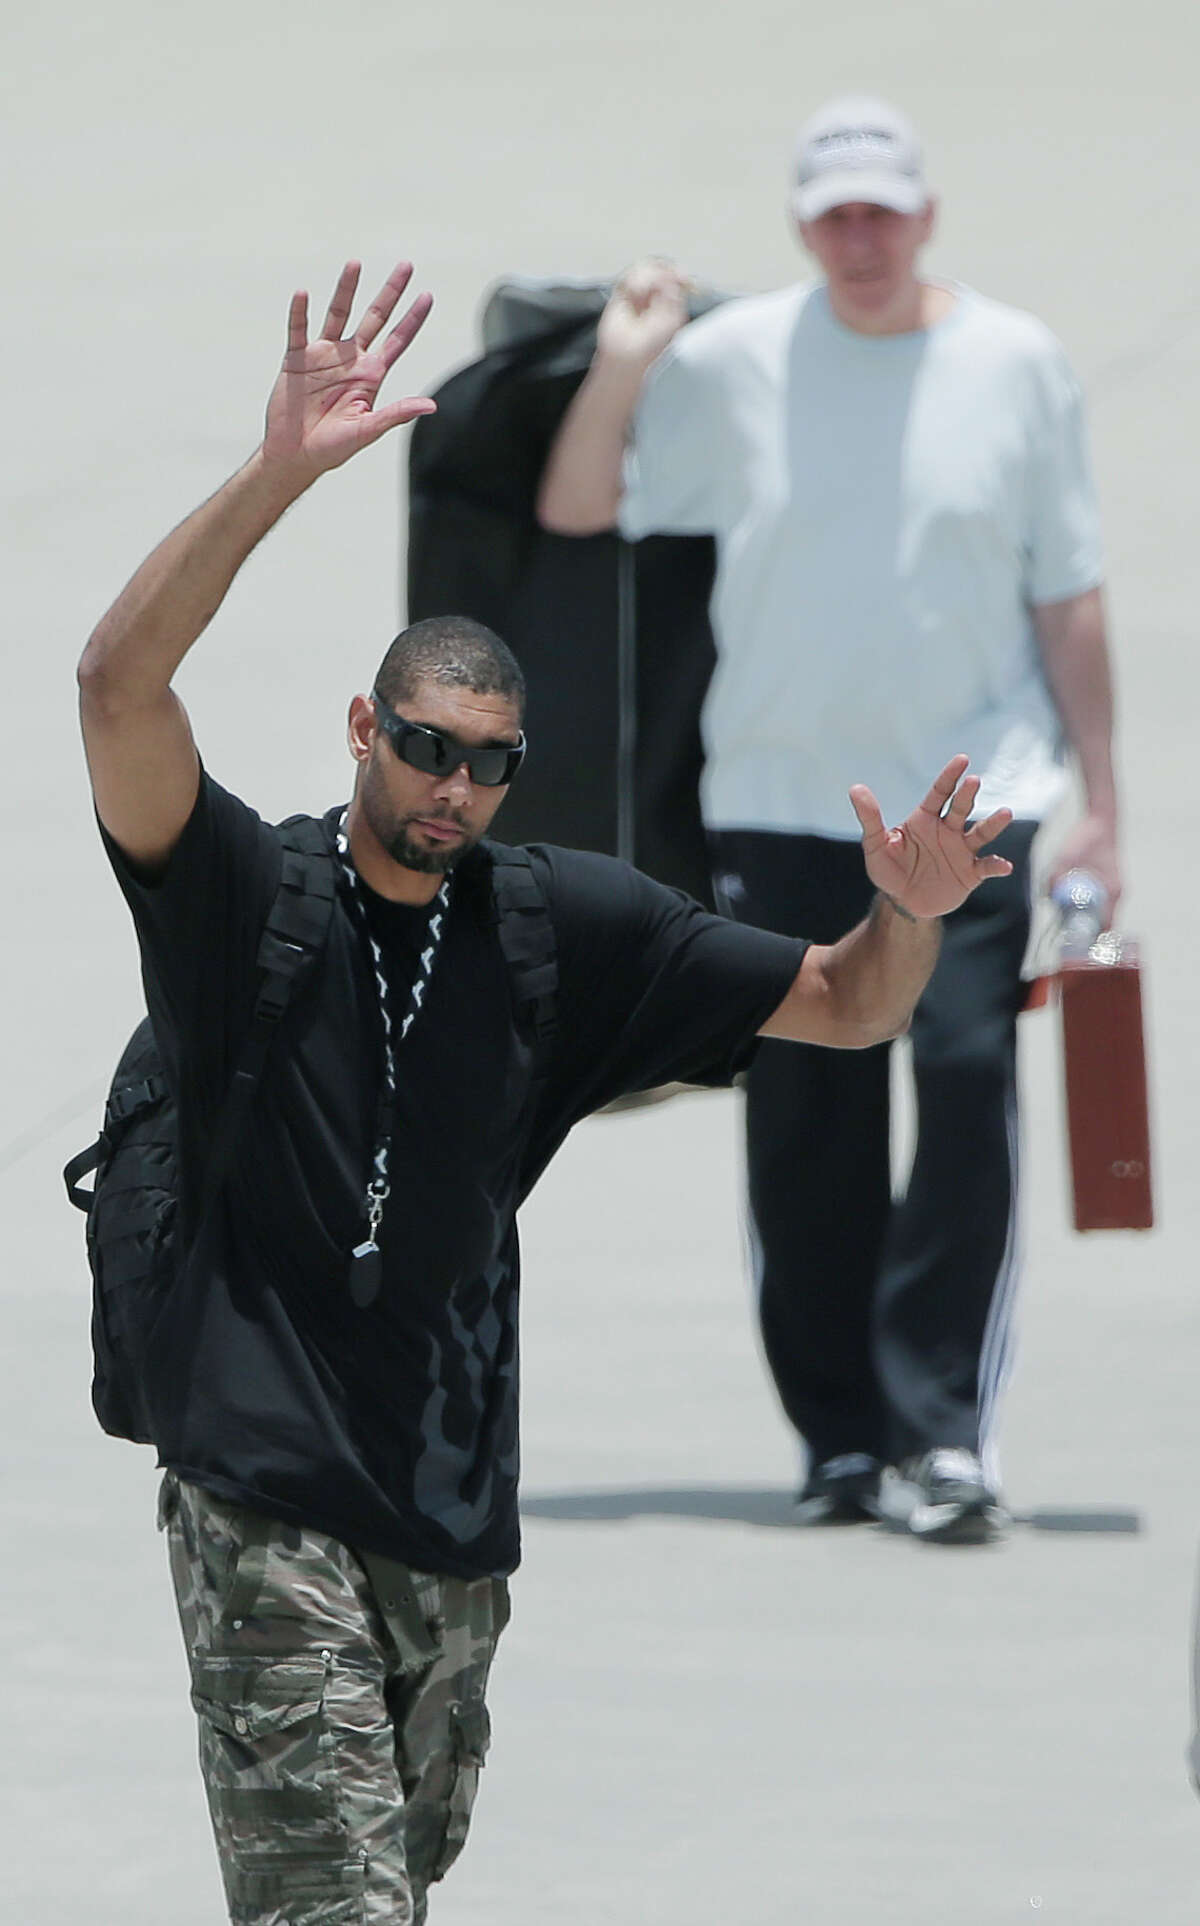 San Antonio Spurs' Tim Duncan, left, with head coach Gregg Popovich, rear right, waves to fans after the team returned home from losing to the Miami Heat in the NBA Finals basketball game, Friday, June 21, 2013, in San Antonio. (AP Photo/Eric Gay)